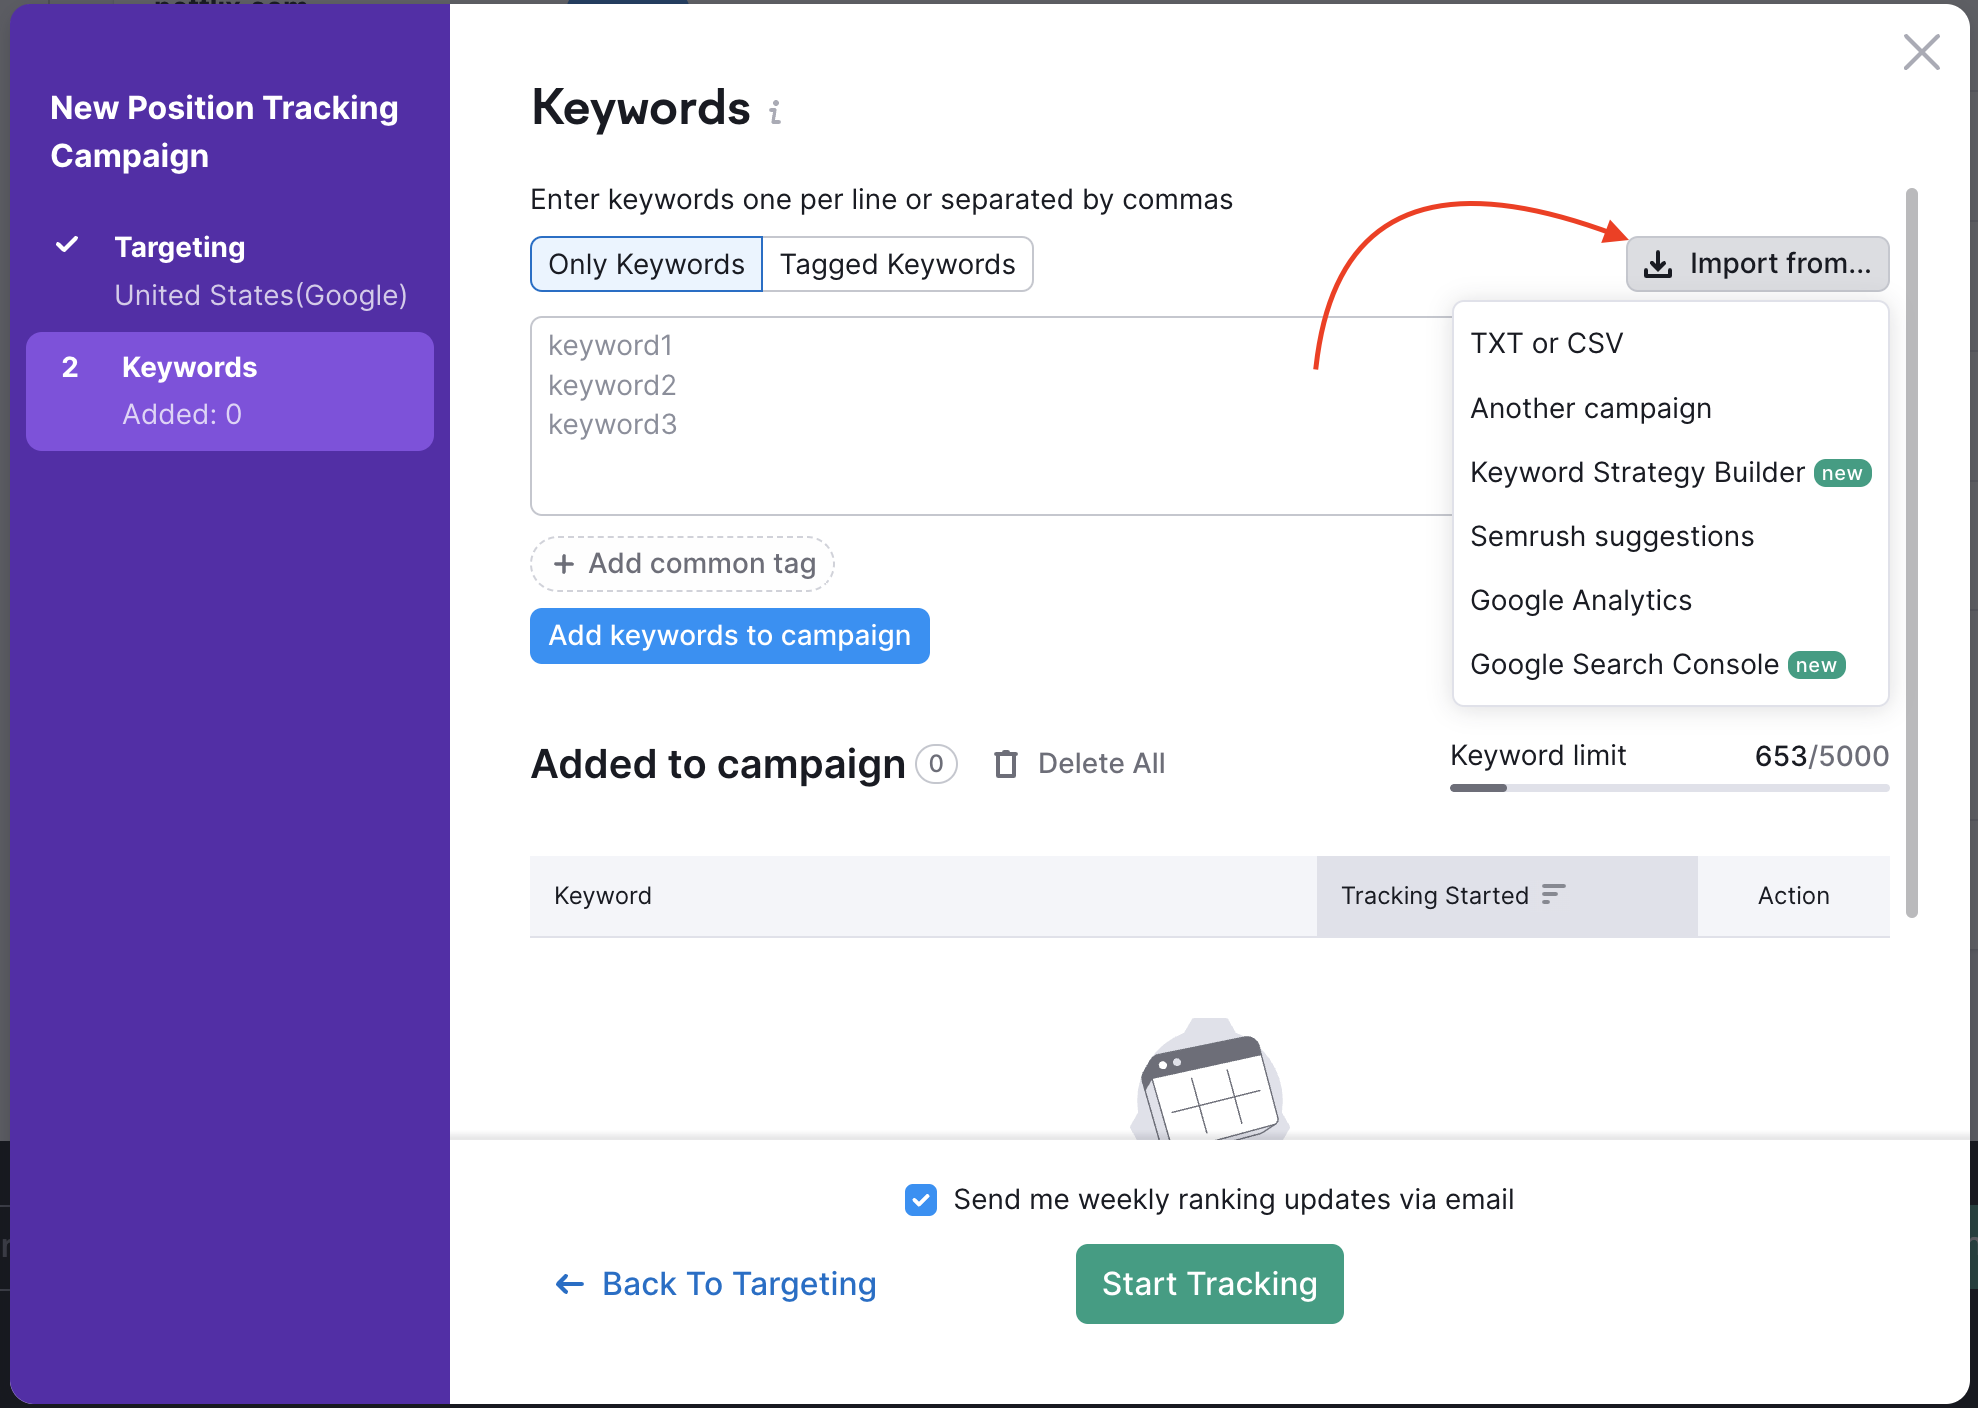 Second step of Position Tracking setup process. Keyword tab has a field for entering keywords, two sections, 'Only Keywords' and 'Tagged Keywords', and a dropdown menu available from the 'Import from' button, which a red arrow is pointing at. The menu has four import options: TXT or CSV, Another campaign, Semrush suggestions, and Google Analytics.